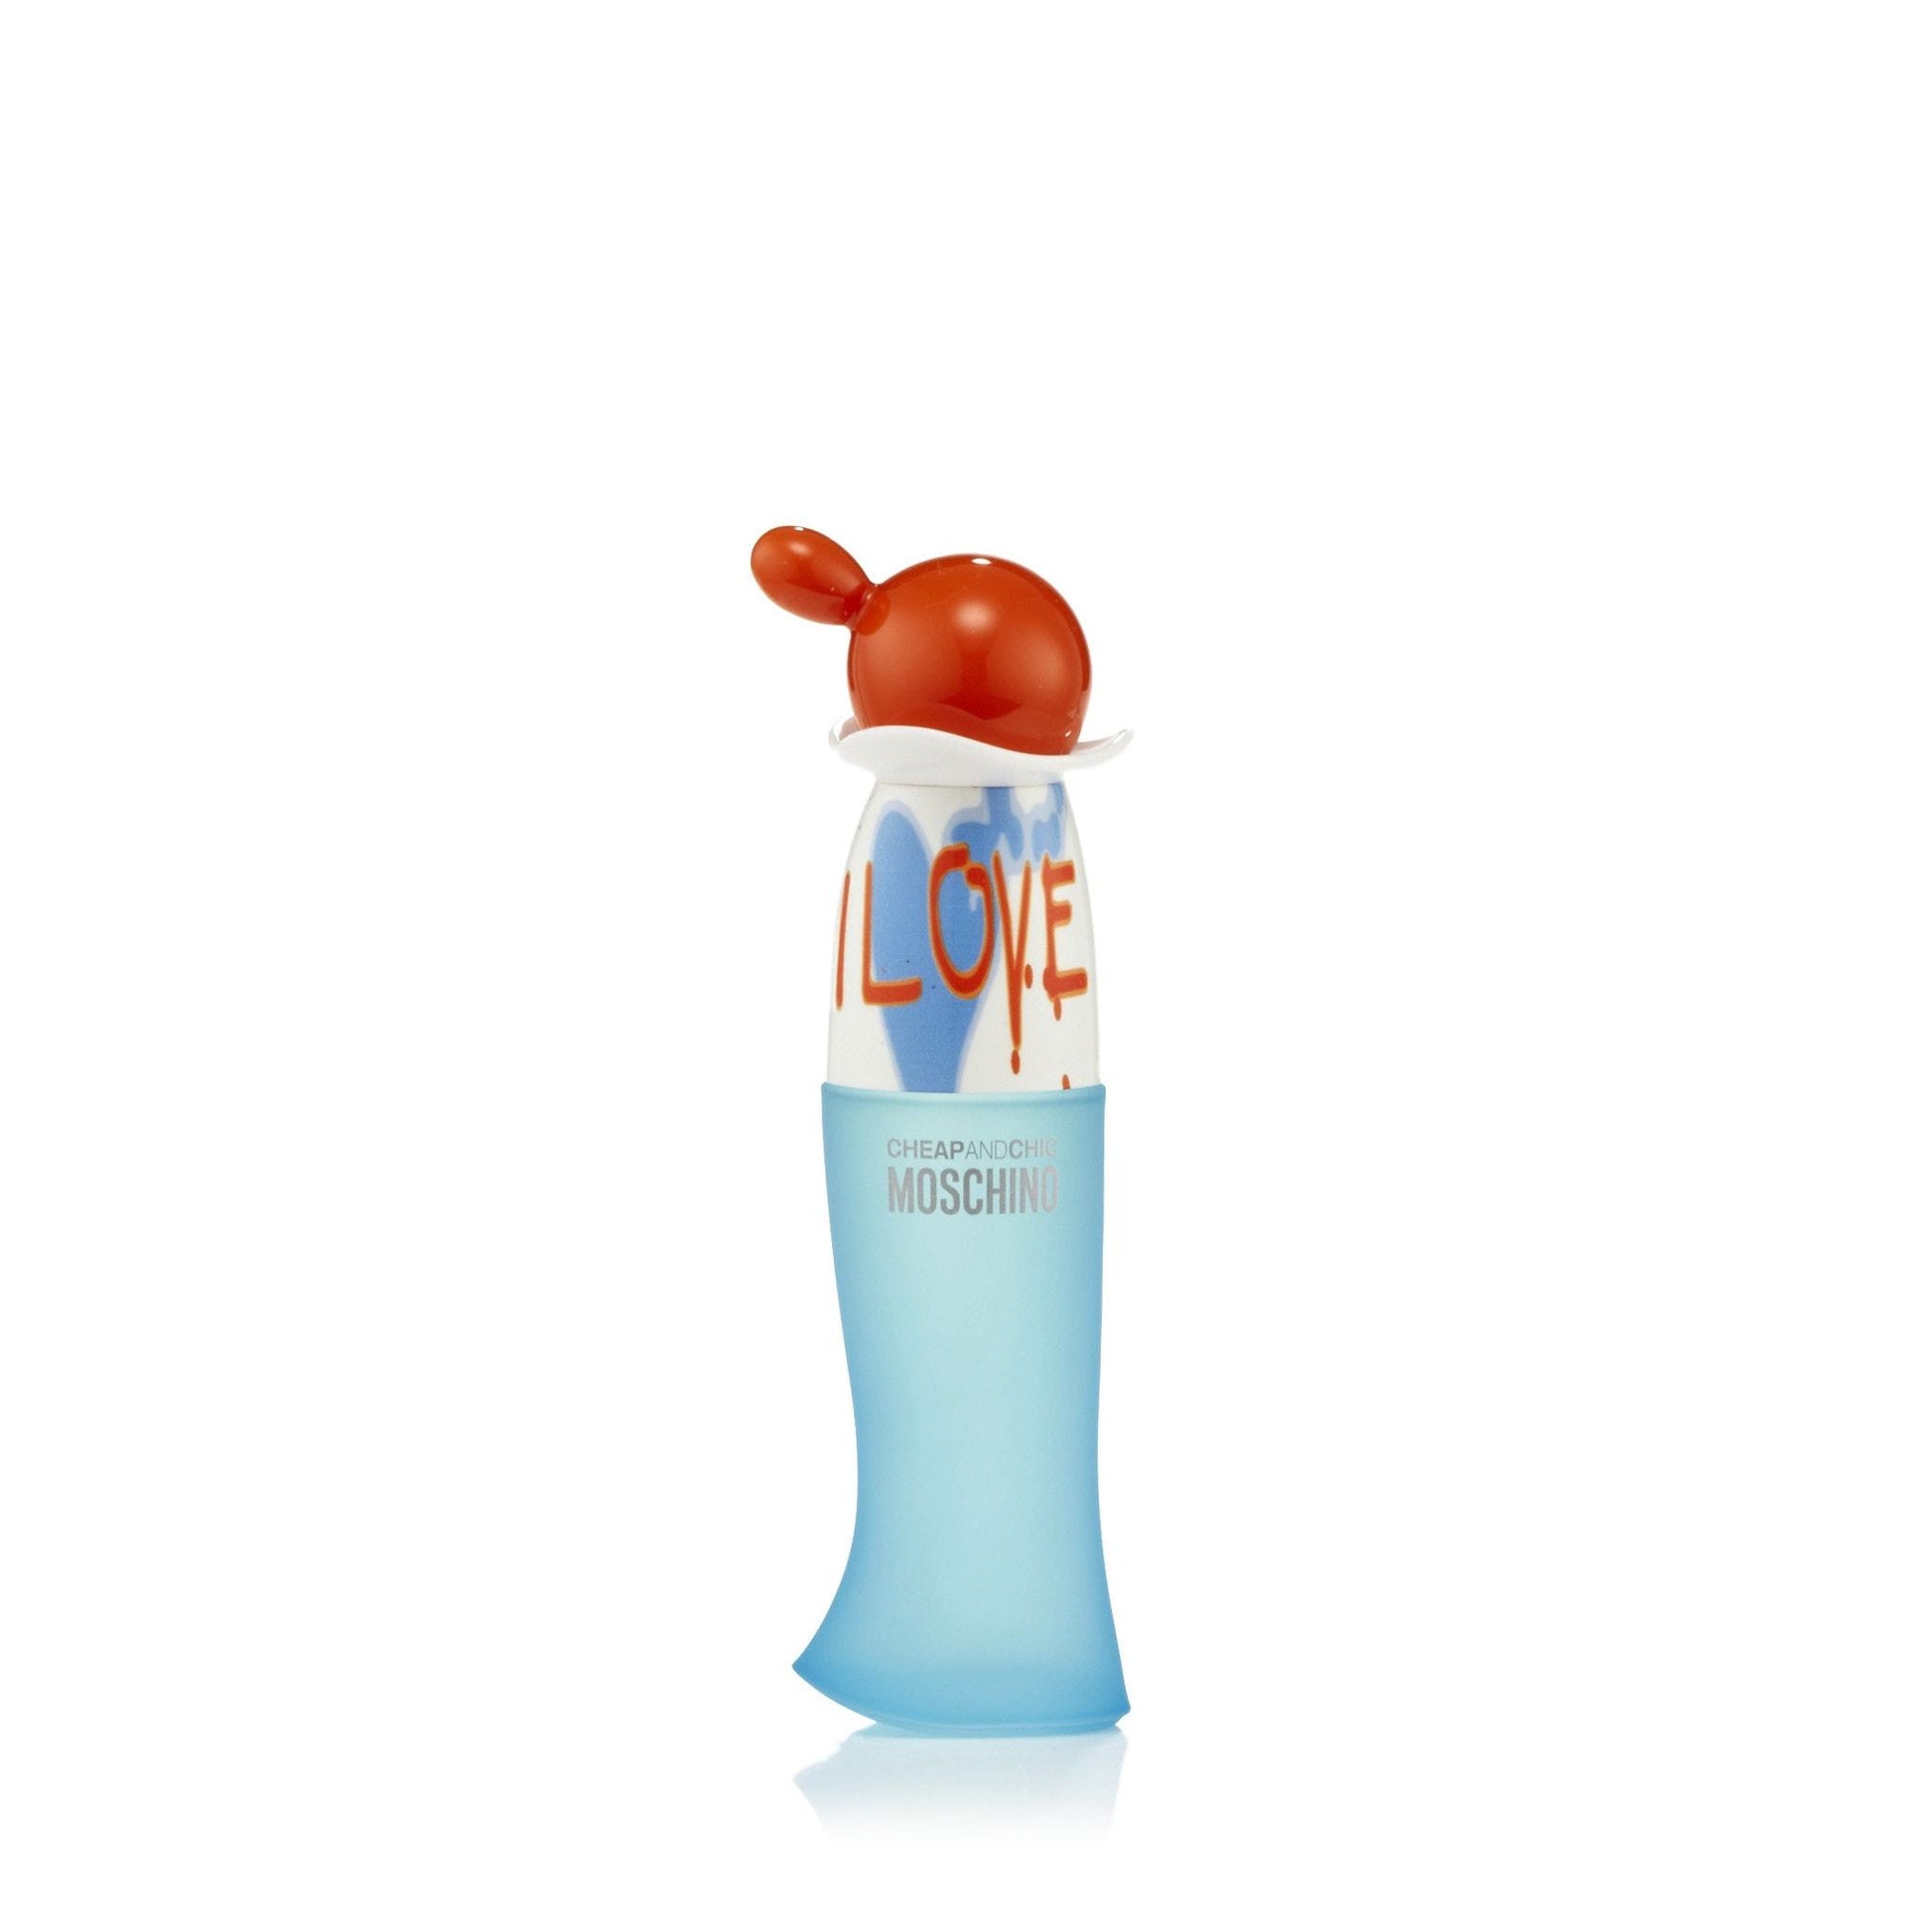 I Love Love Eau de Toilette Spray for Women by Moschino, Product image 3